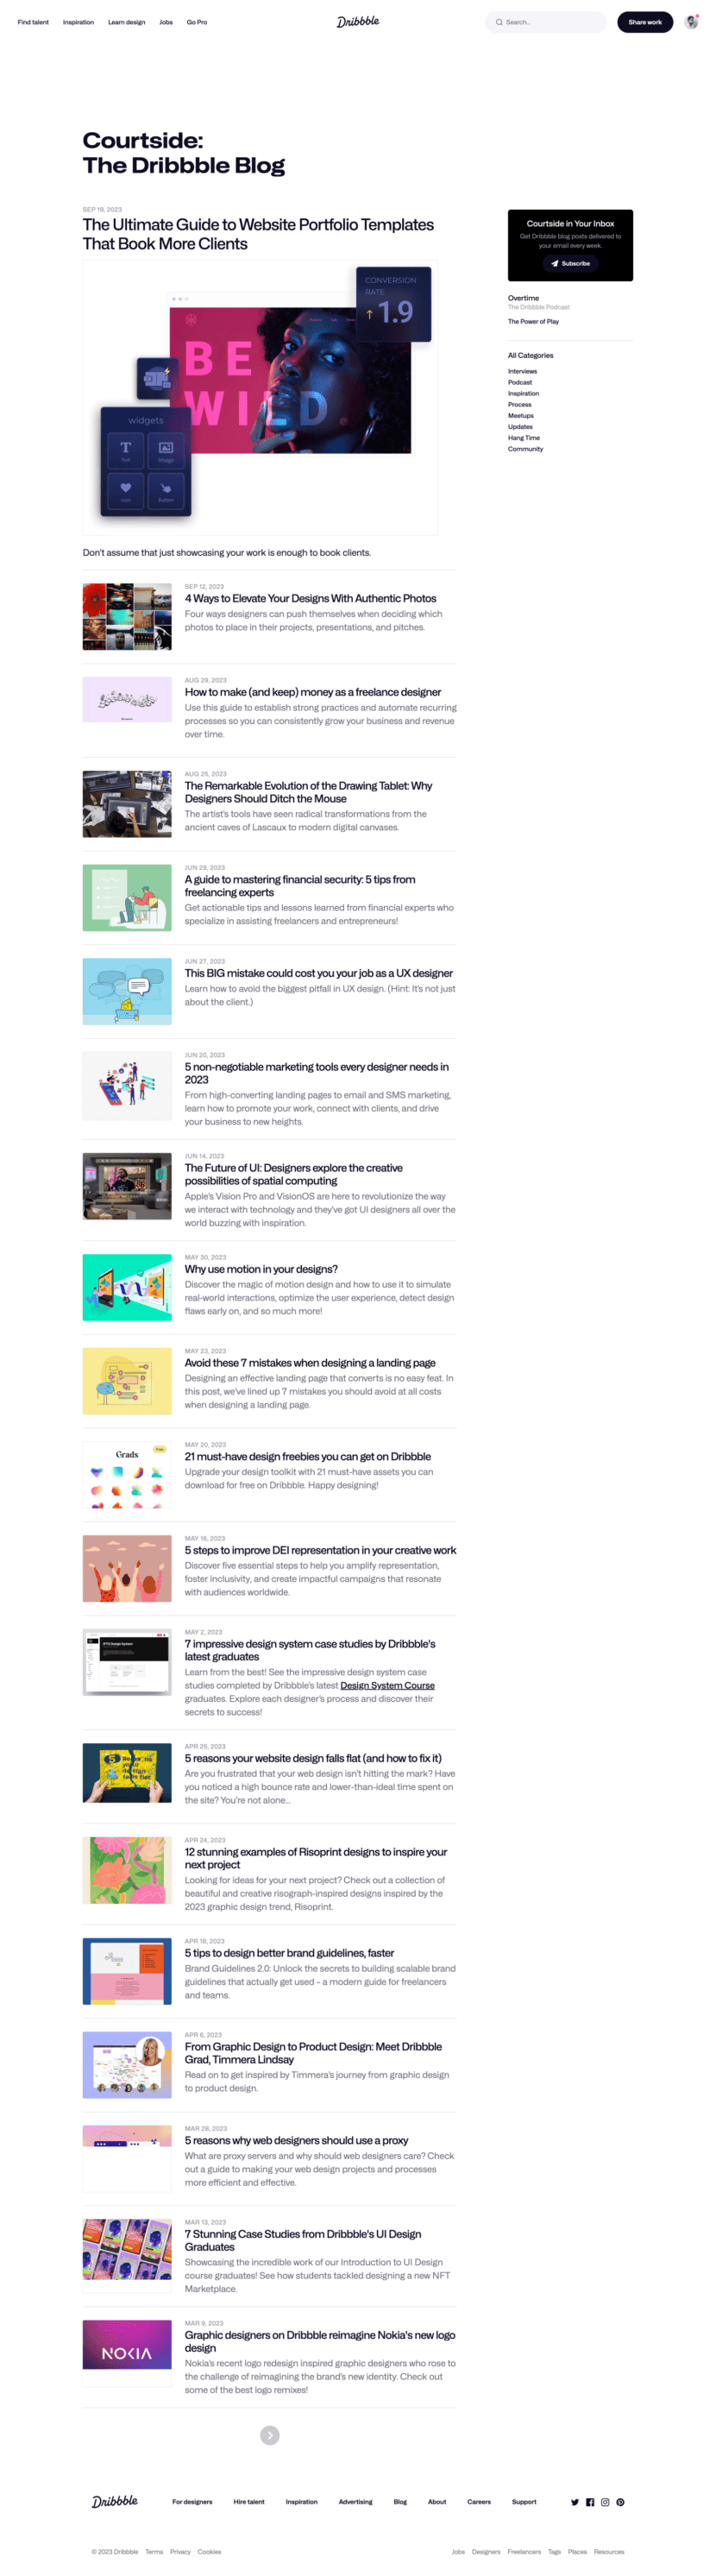 dribbble-blog-page